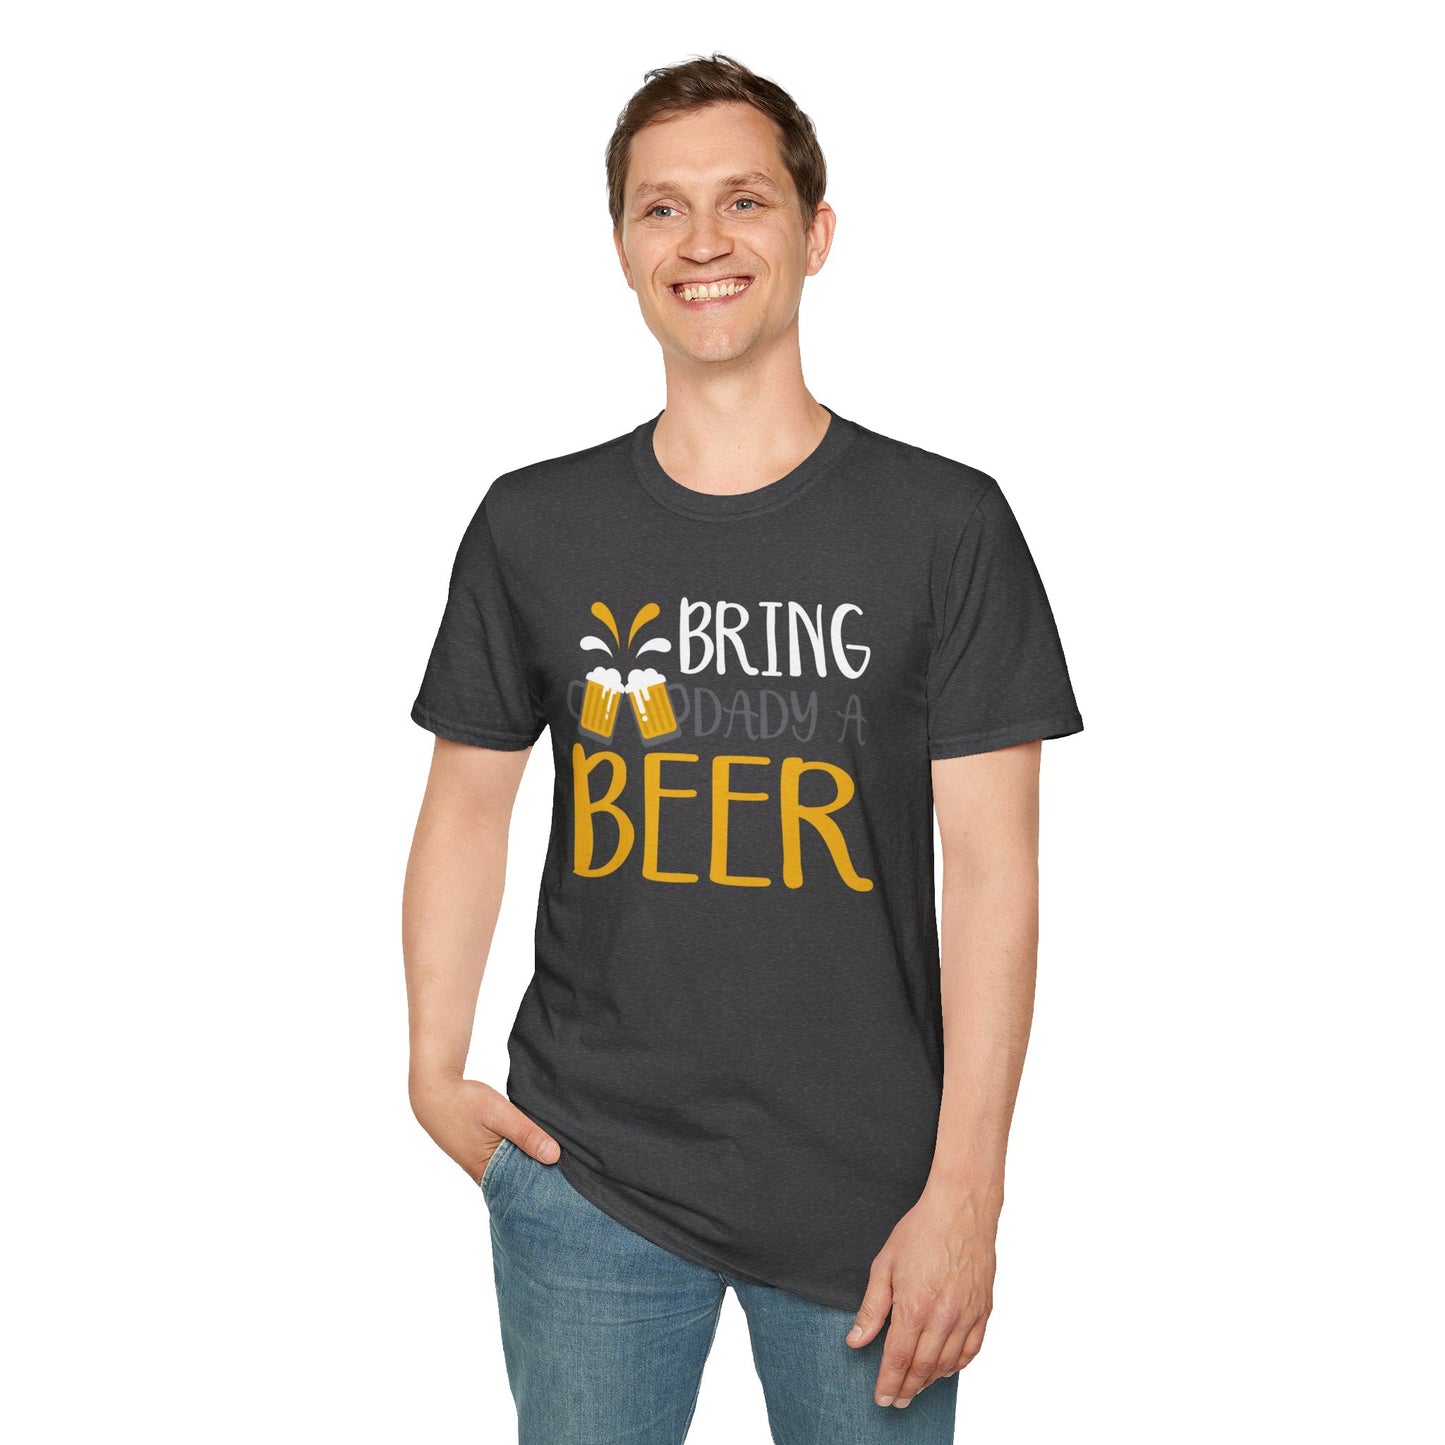 Dad's Favorite Brews: 'Bring Dad a BEER' T-Shirt for the Ultimate Father's Day Gift